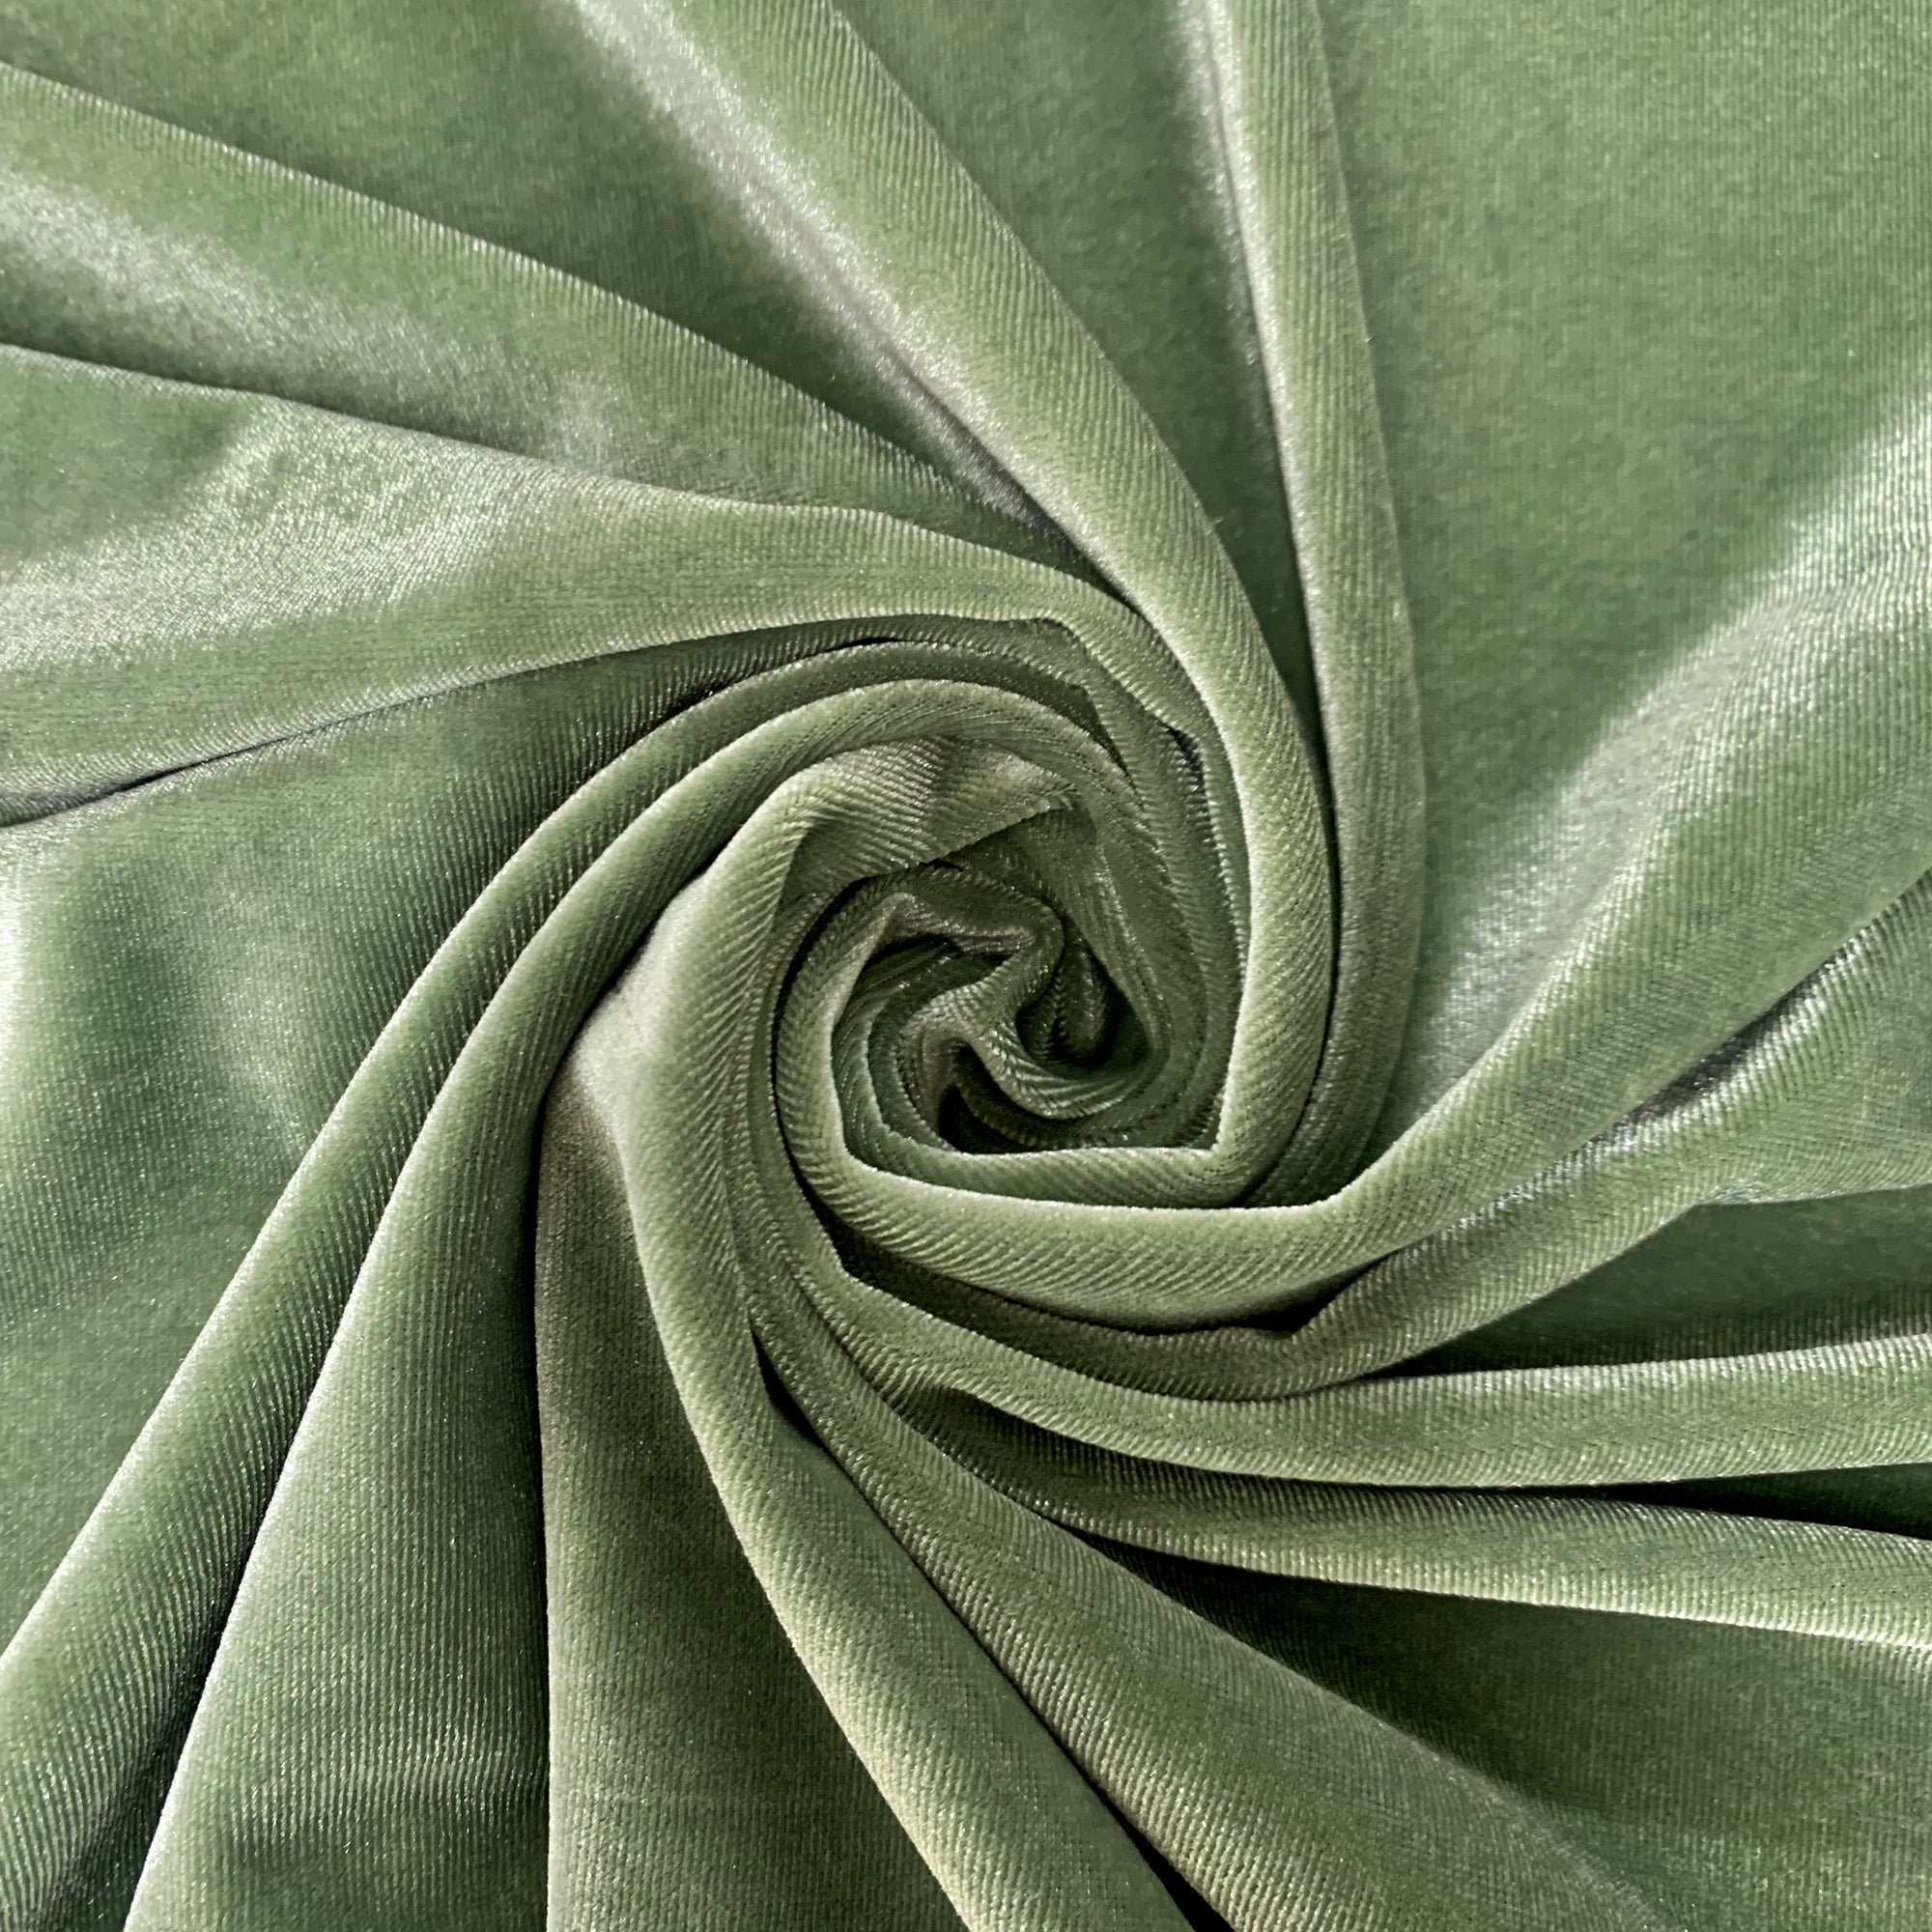 Princess SAGE Polyester Stretch Velvet Fabric for Bows, Top Knots, Head Wraps, Scrunchies, Clothes, Costumes, Crafts